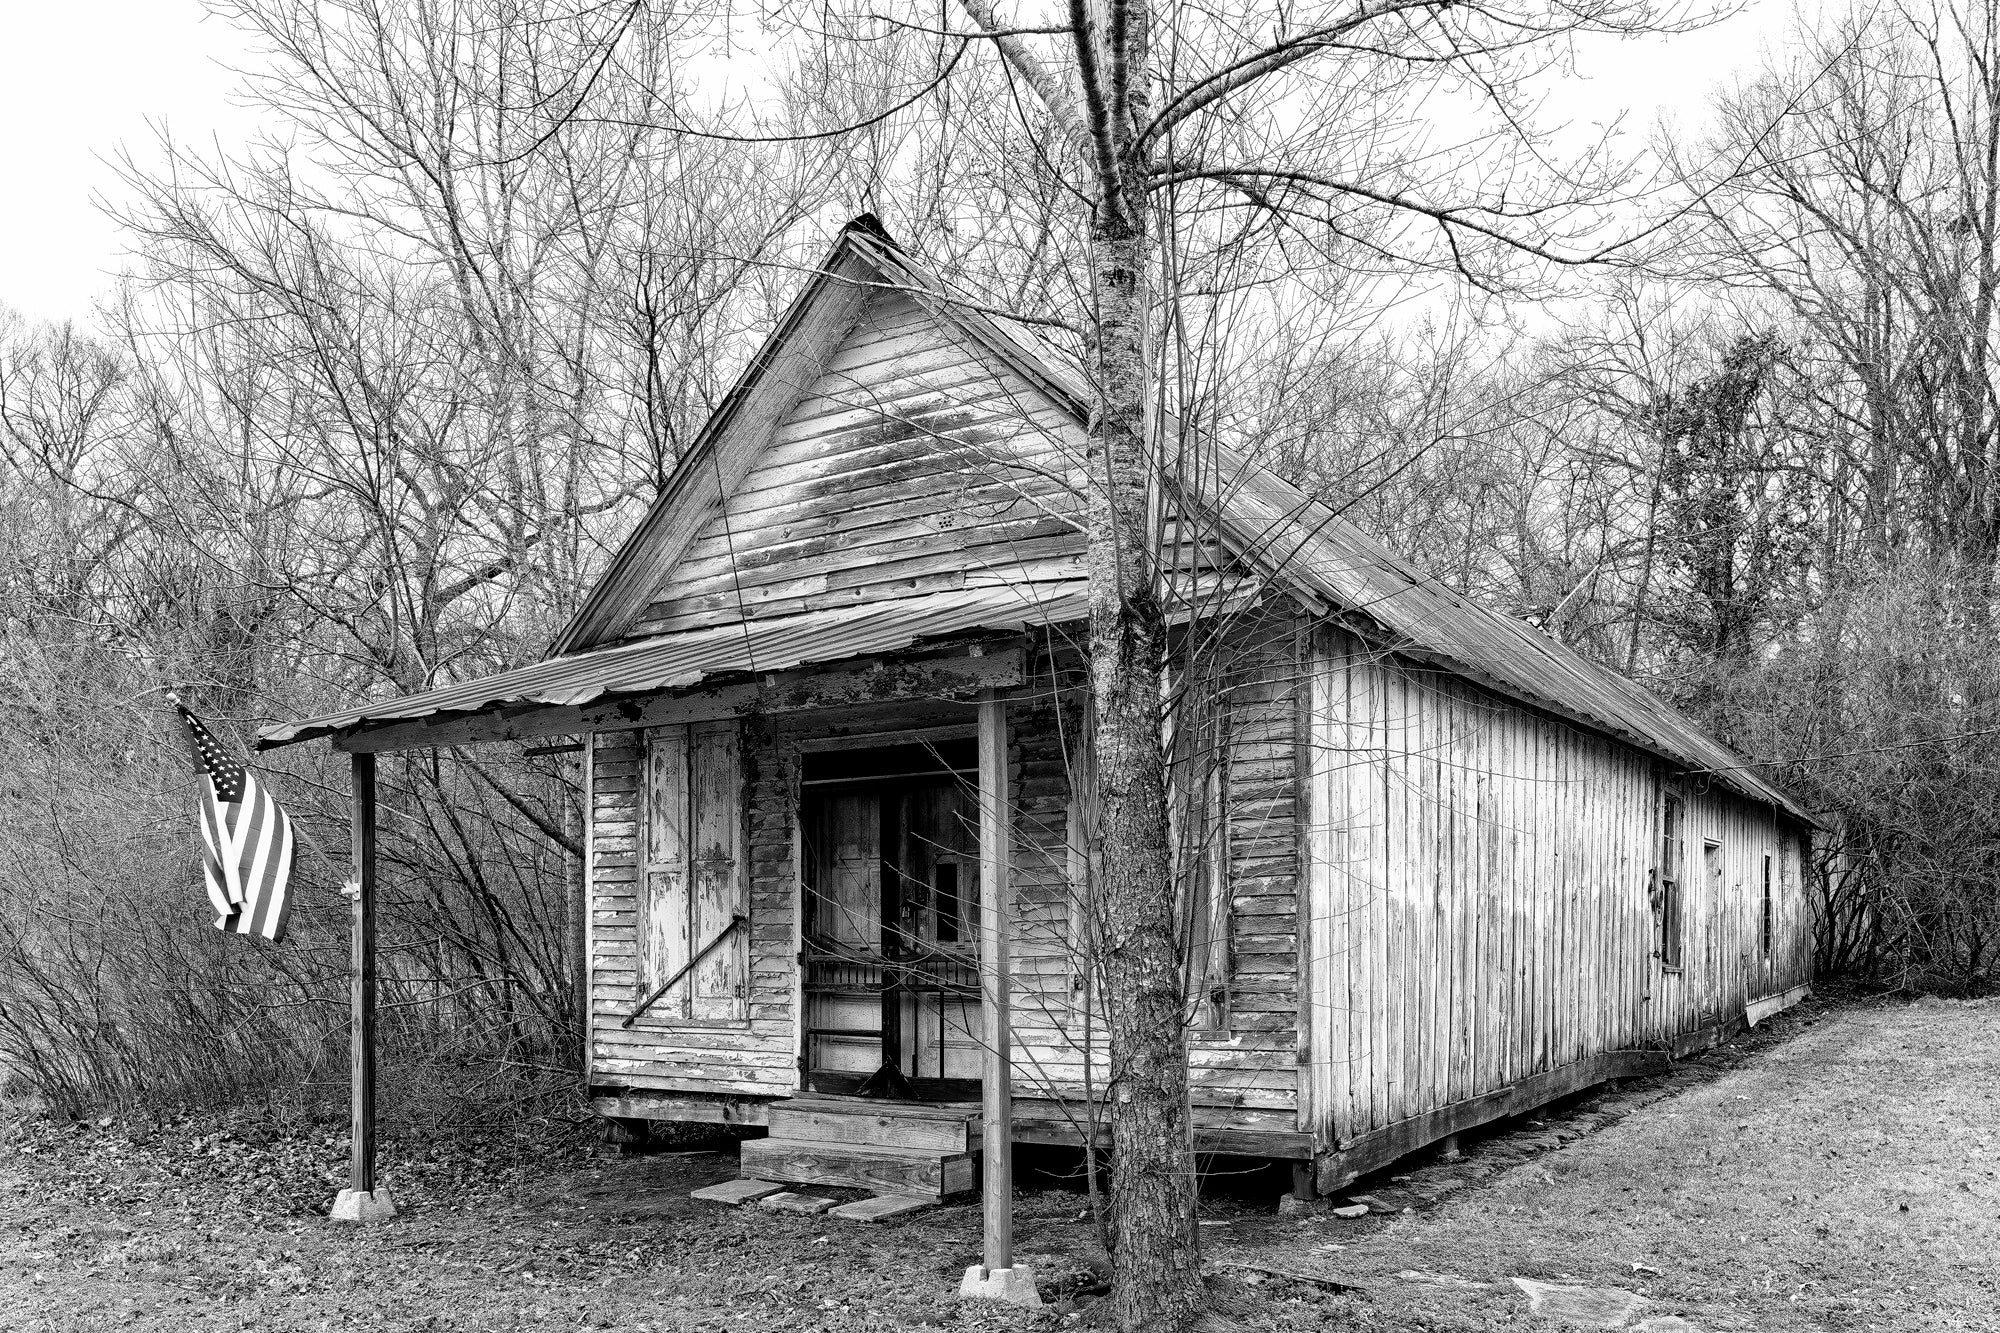 Abandoned Old Country Store - Black and White Photograph by Keith Dotson. Buy a fine art print.